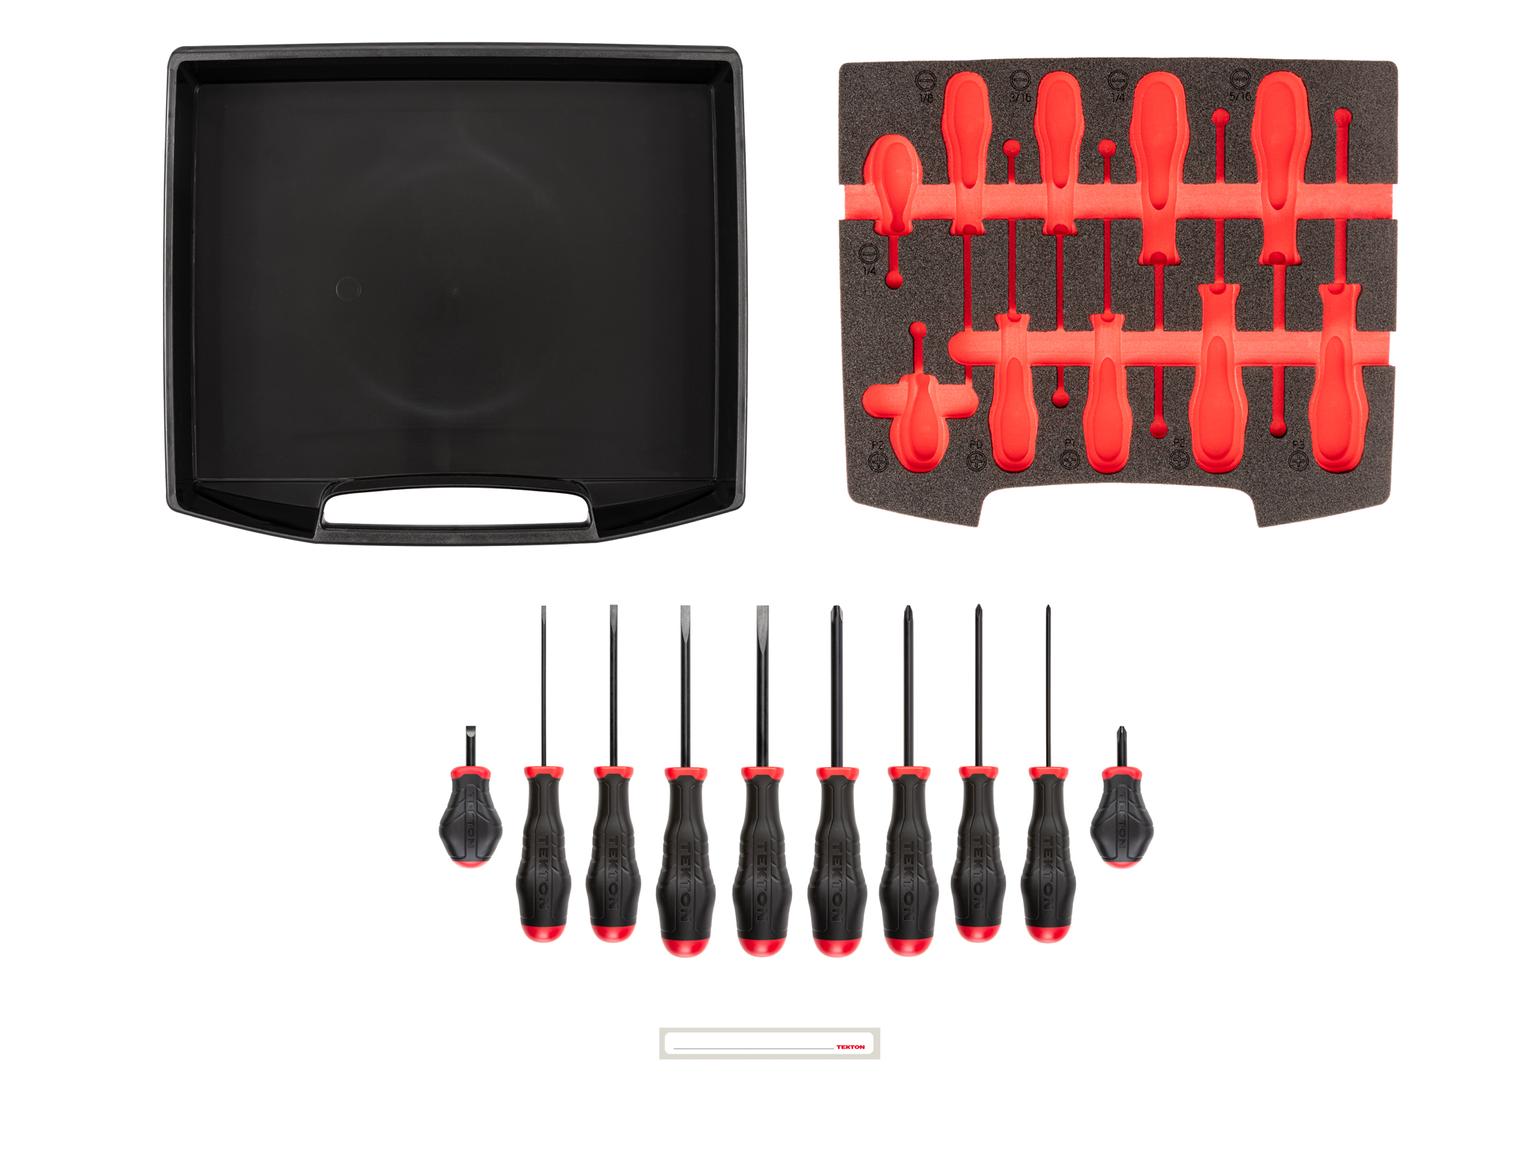 TEKTON OLB94101-T High-Torque Screwdriver Set, 10-Piece (#0-#3, 1/8-5/16 in.) in Open Top Drawer and Rack